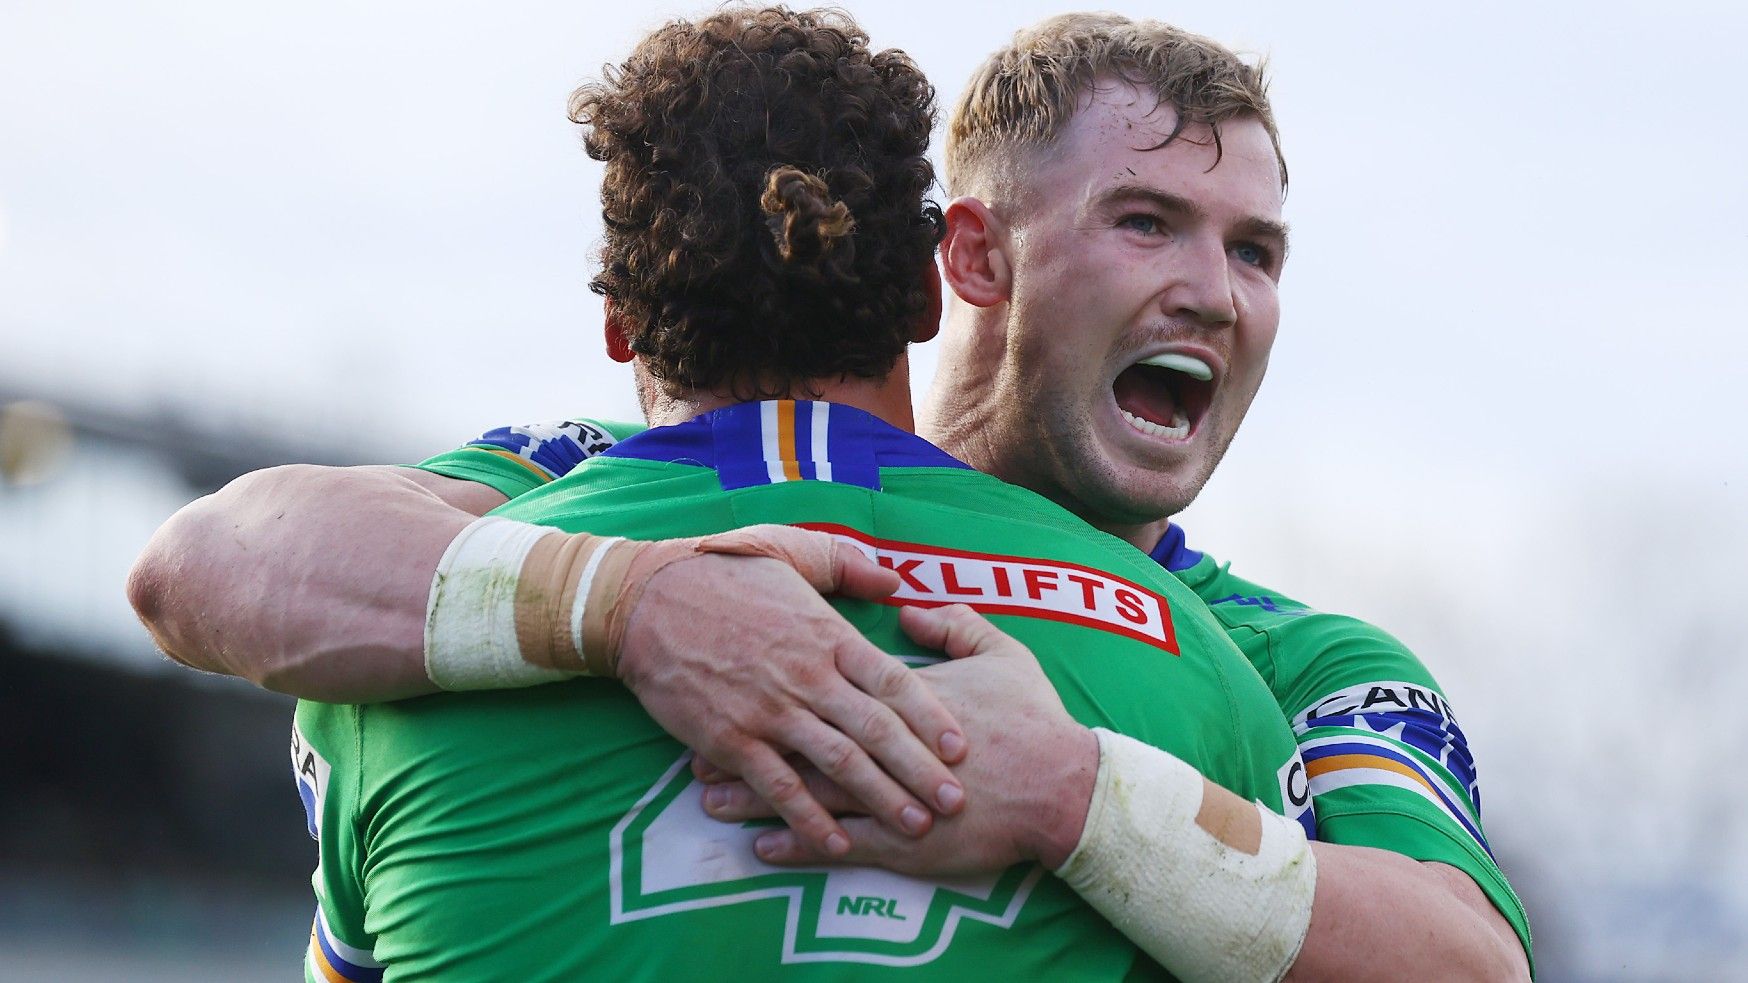 Canberra Raiders produce huge second-half comeback to beat Warriors